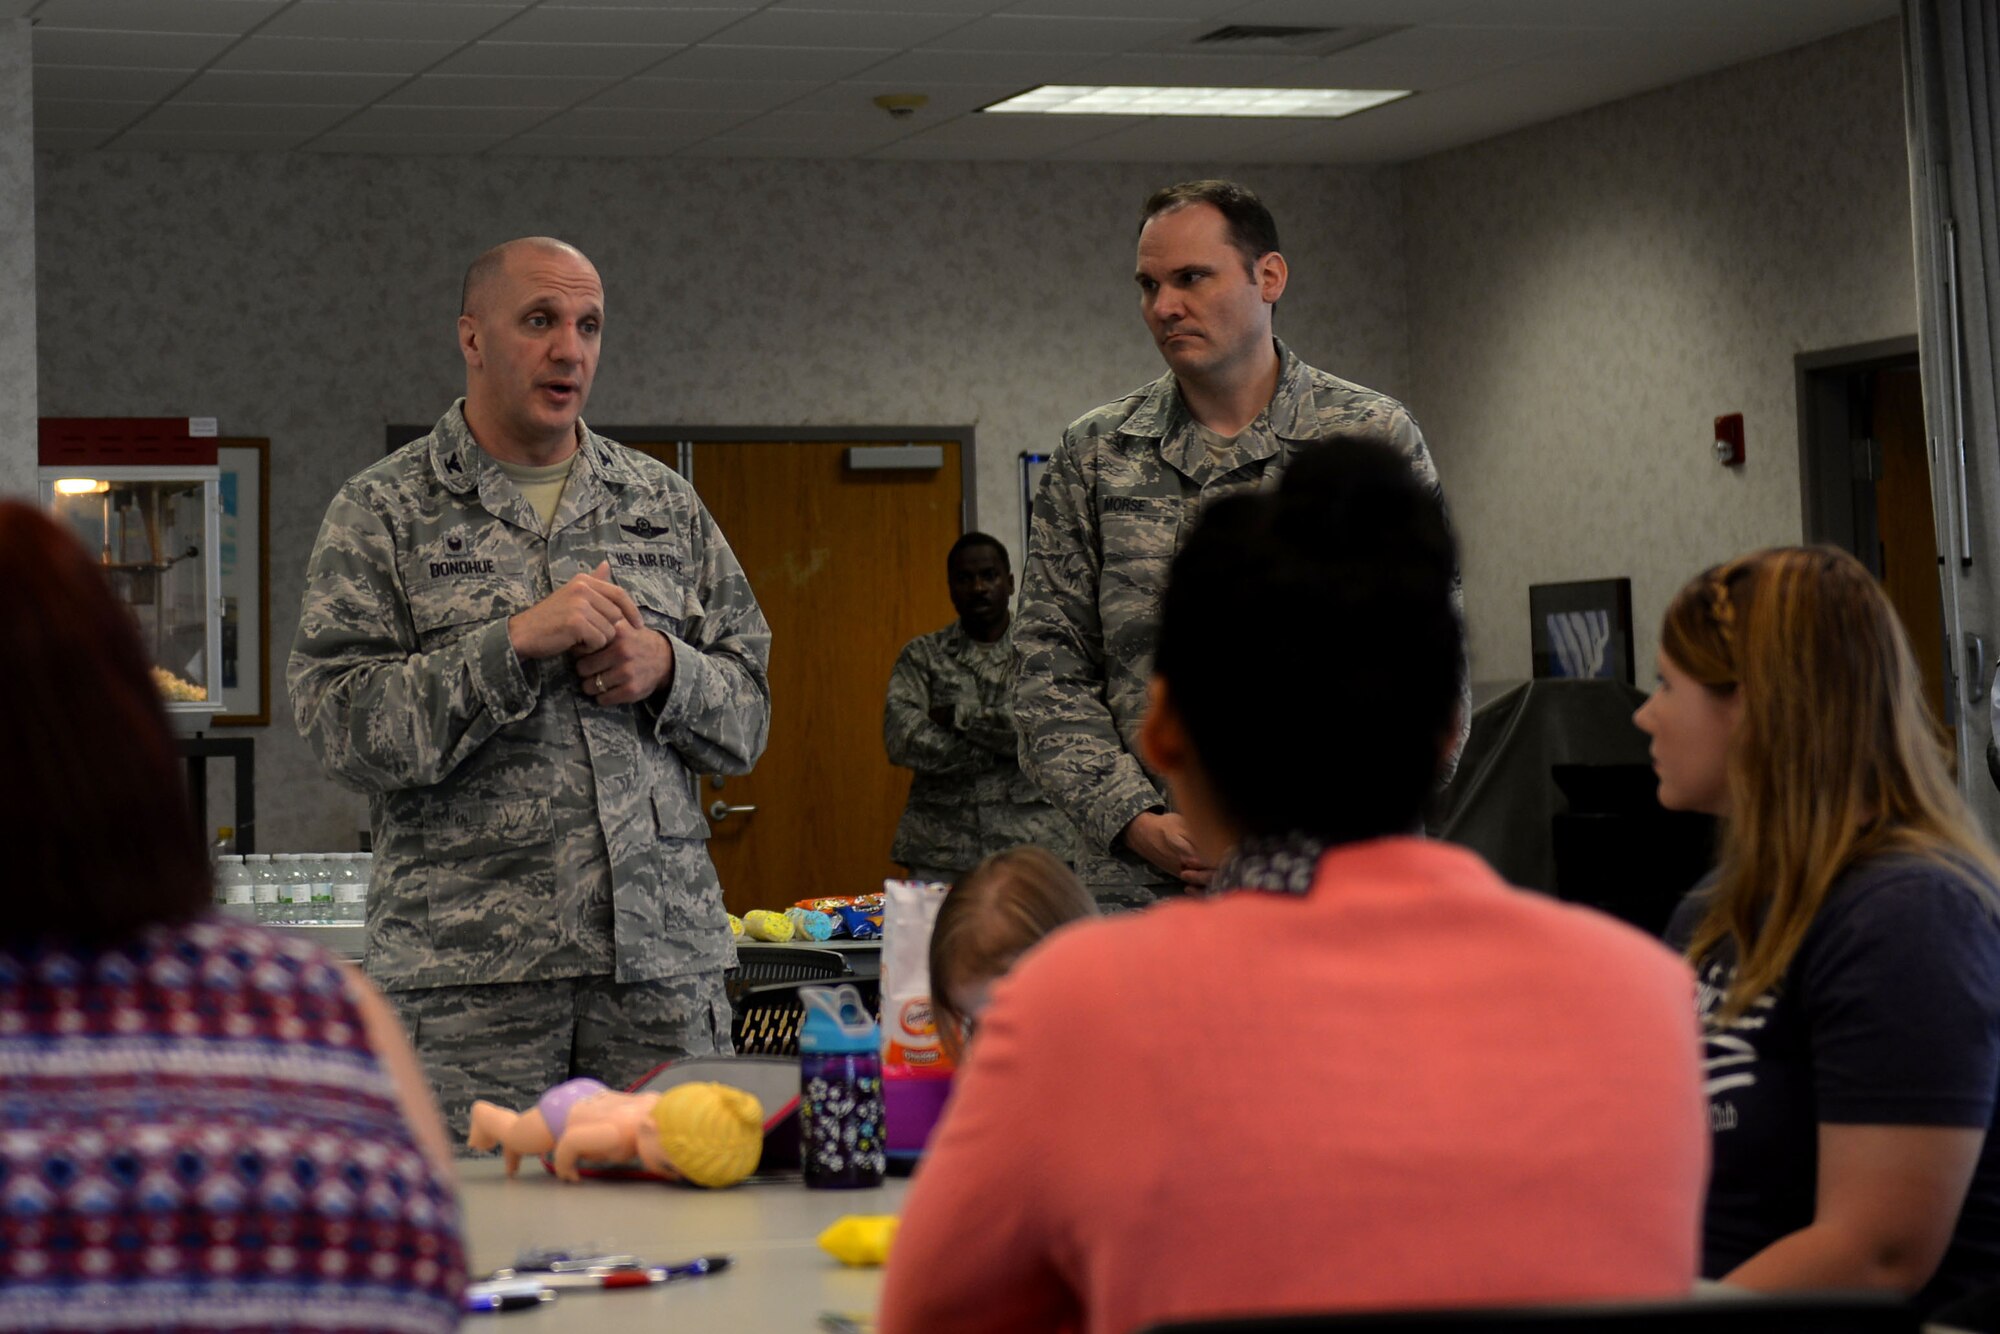 Two men wearing the Airman Battle Uniform speak to three women in different colored shirts.